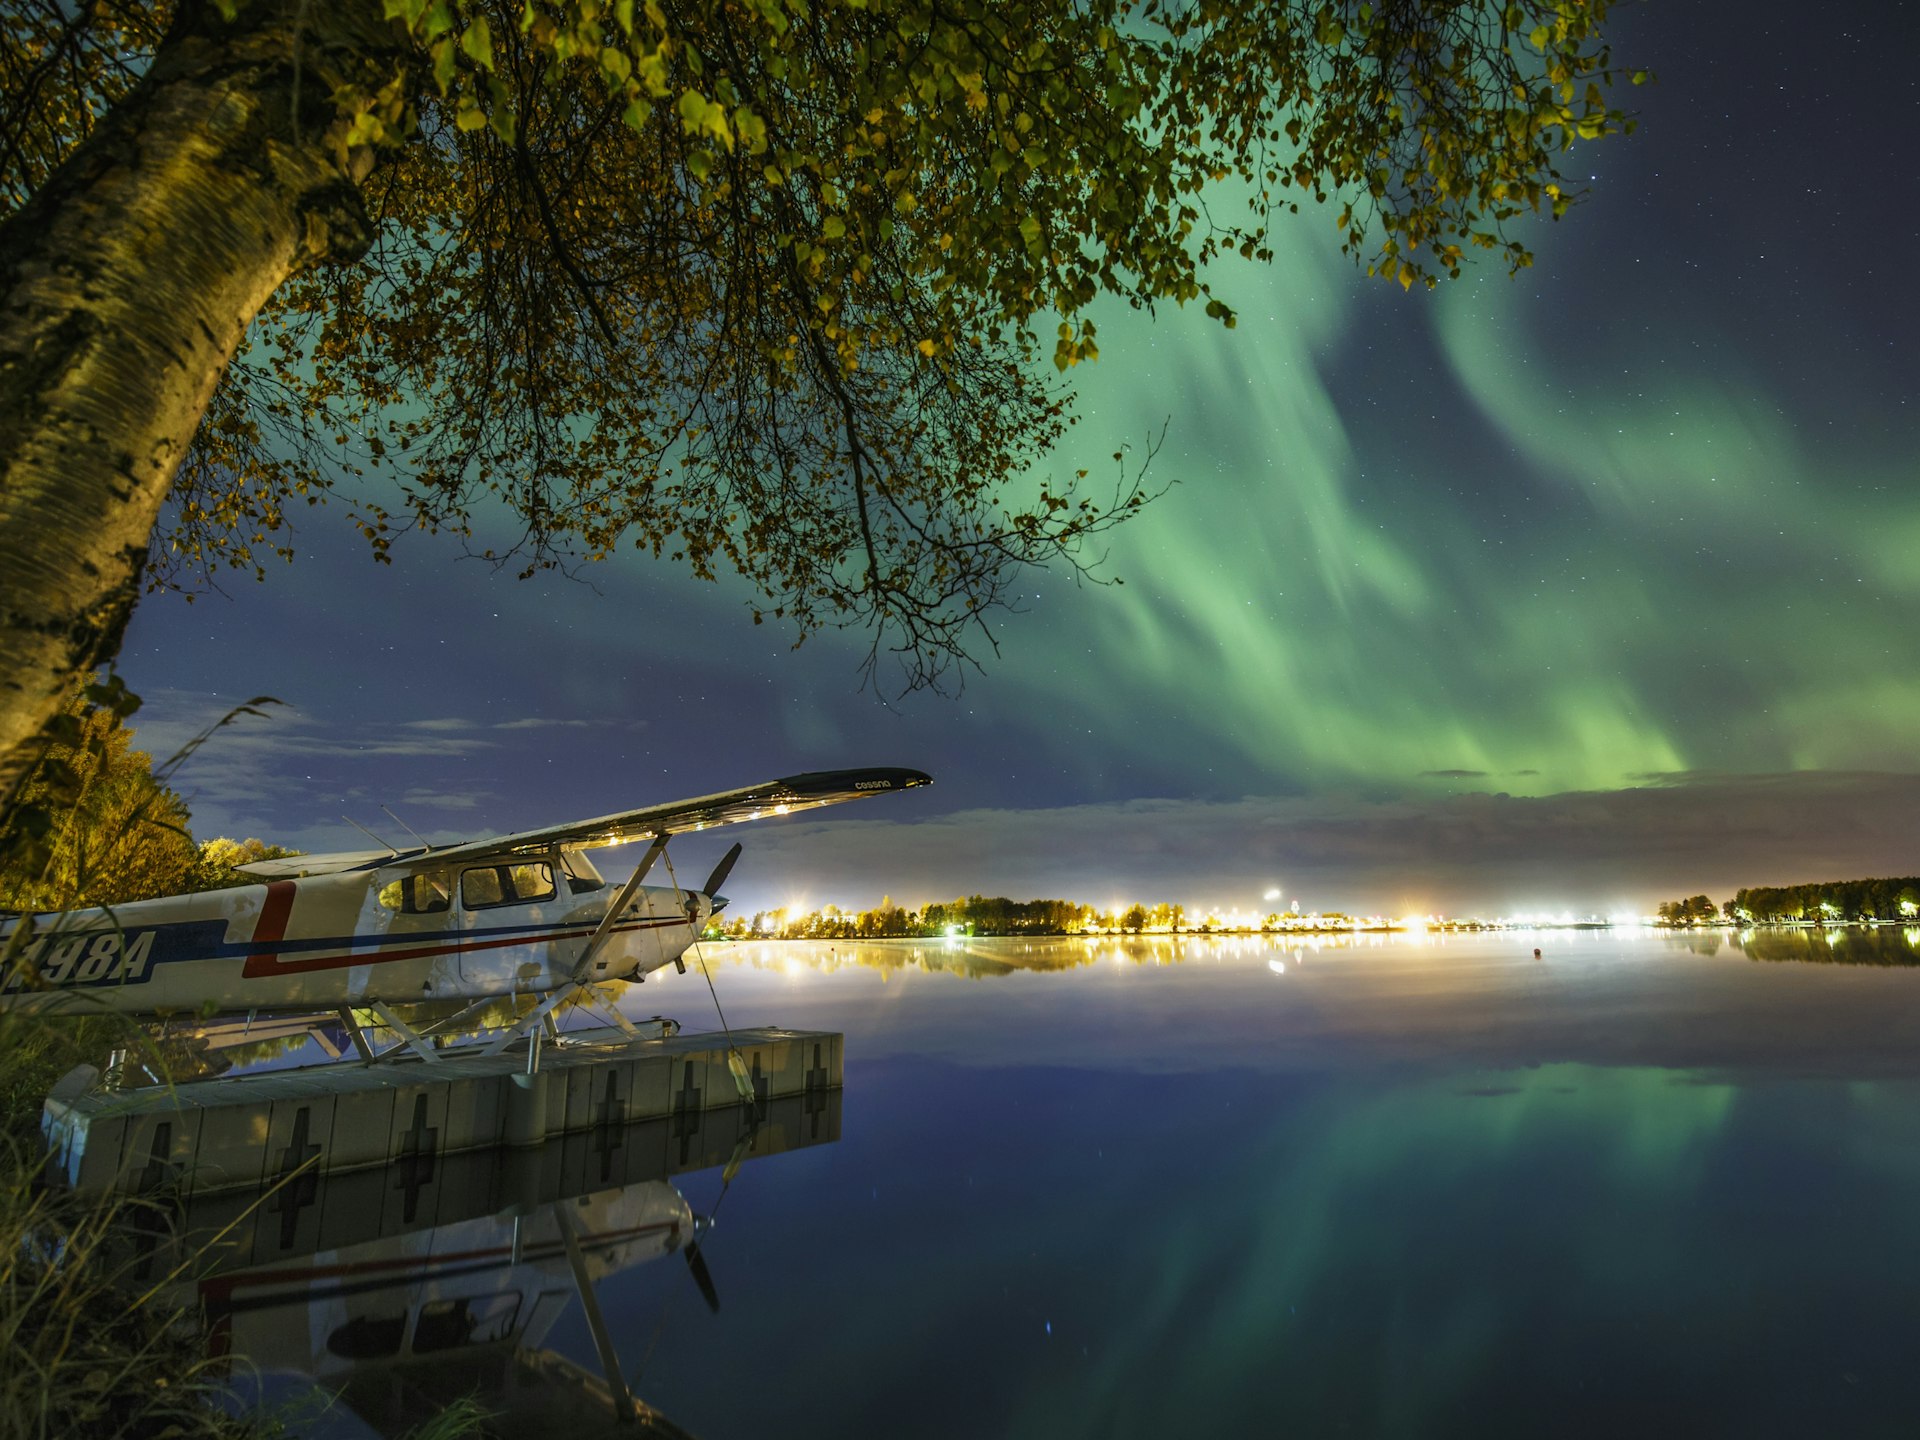 The green glow of the Northern Lights illuminates a seaplane, trees and houses by night at Lake Hood